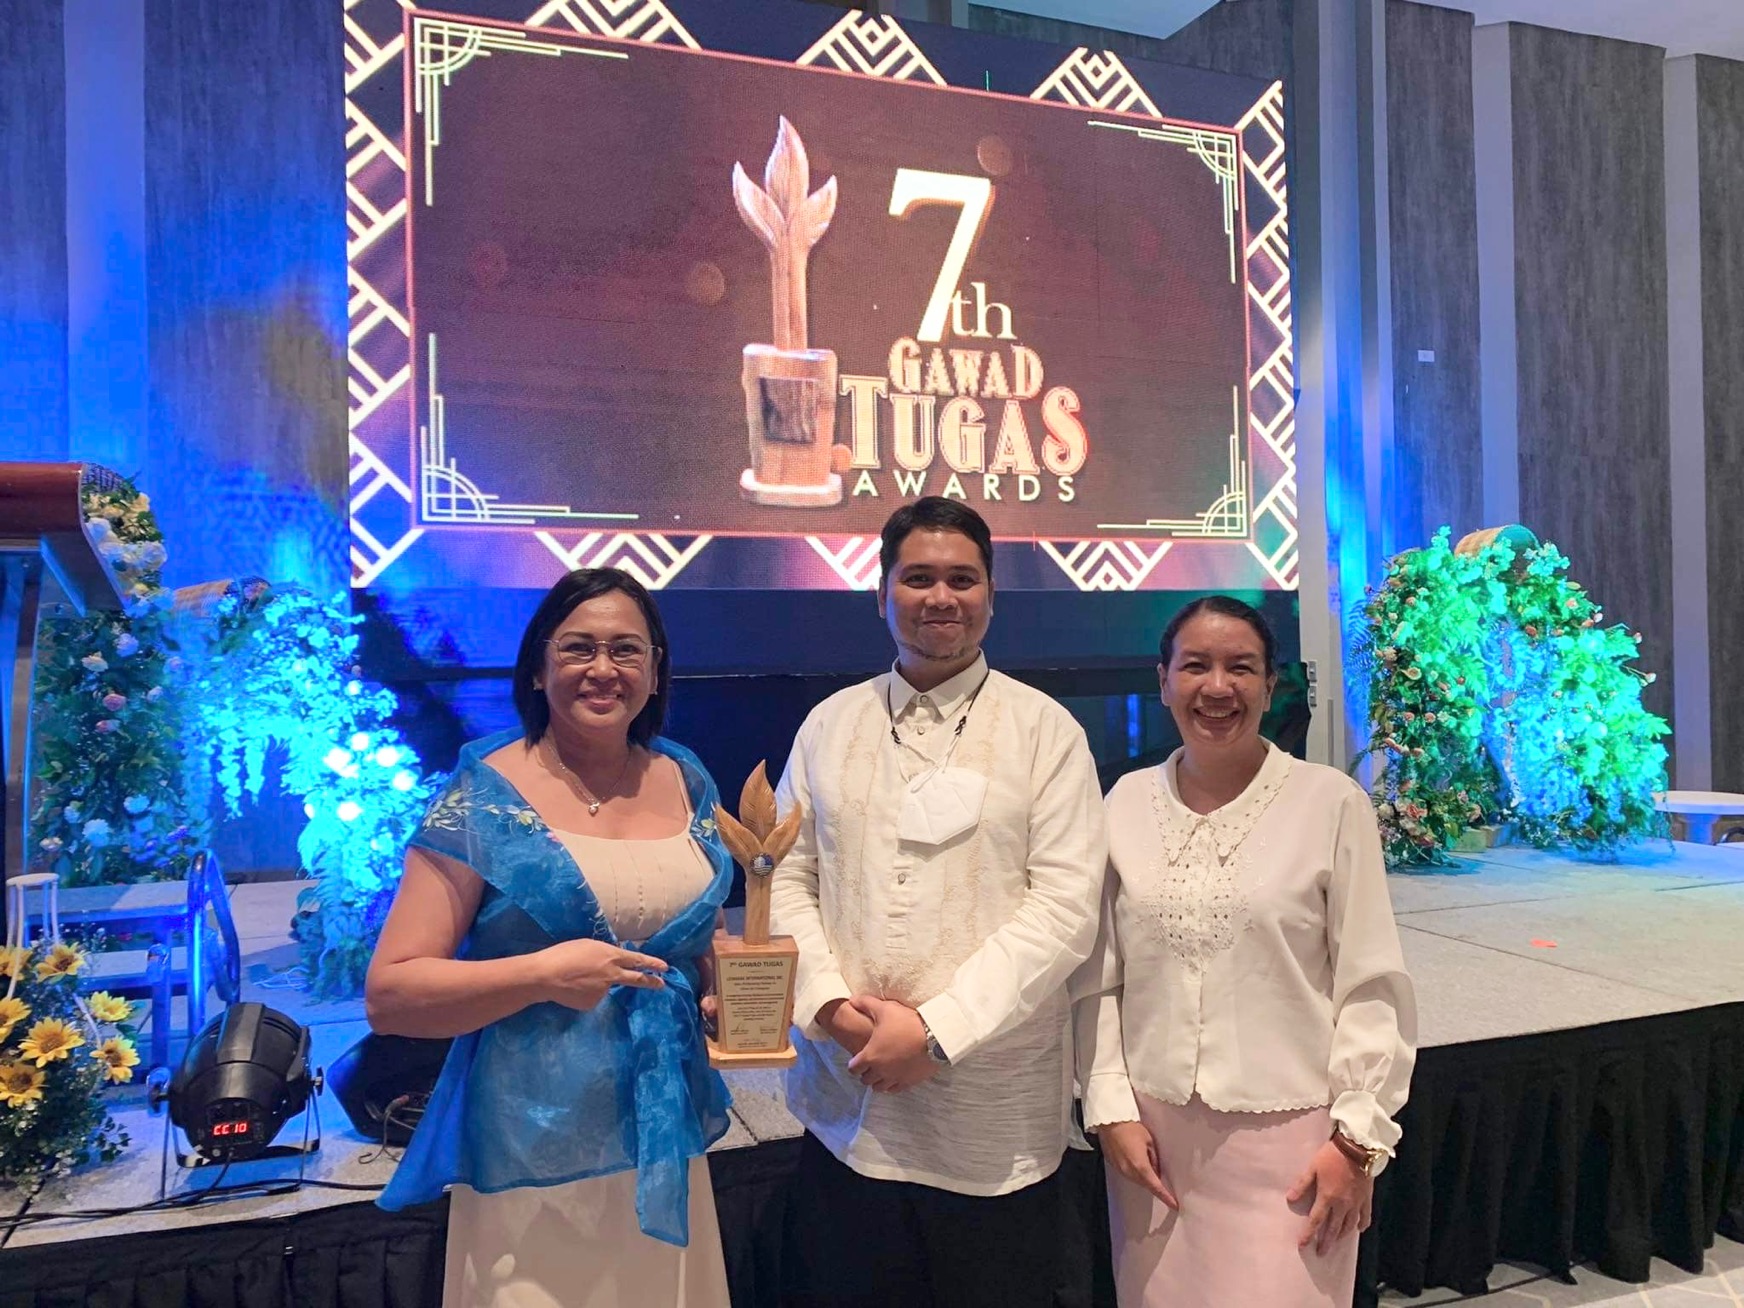 The award was received by Greg Baguioro, Lexmark Site Operations Manager; Leonora Jaralba, Senior EHS Officer; and Normita Navarro, Senior EHS Officer.